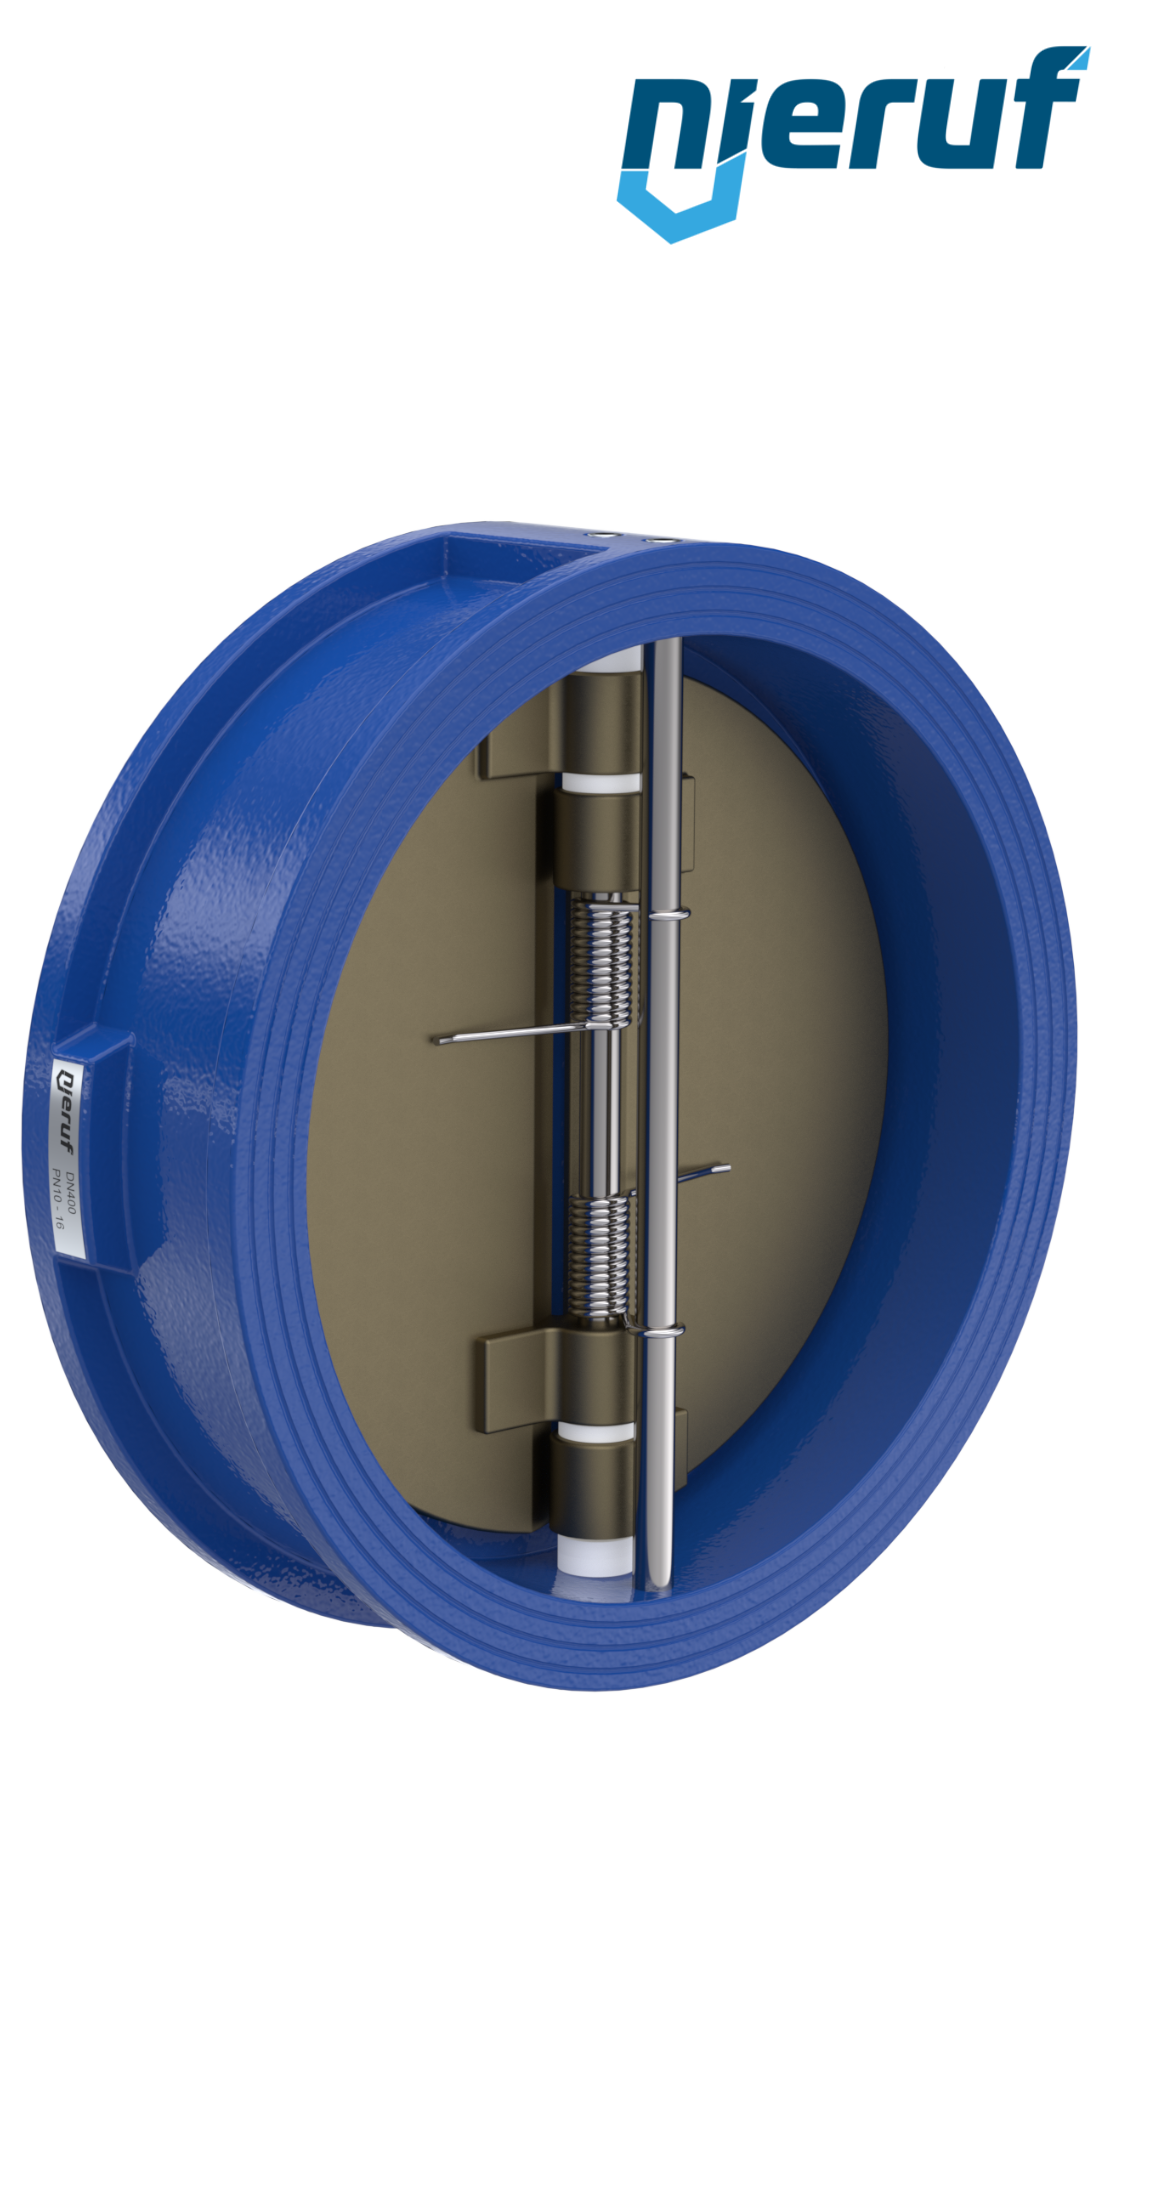 dual plate check valve DN400 DR04 GGG40 epoxyd plated blue 180µm FKM